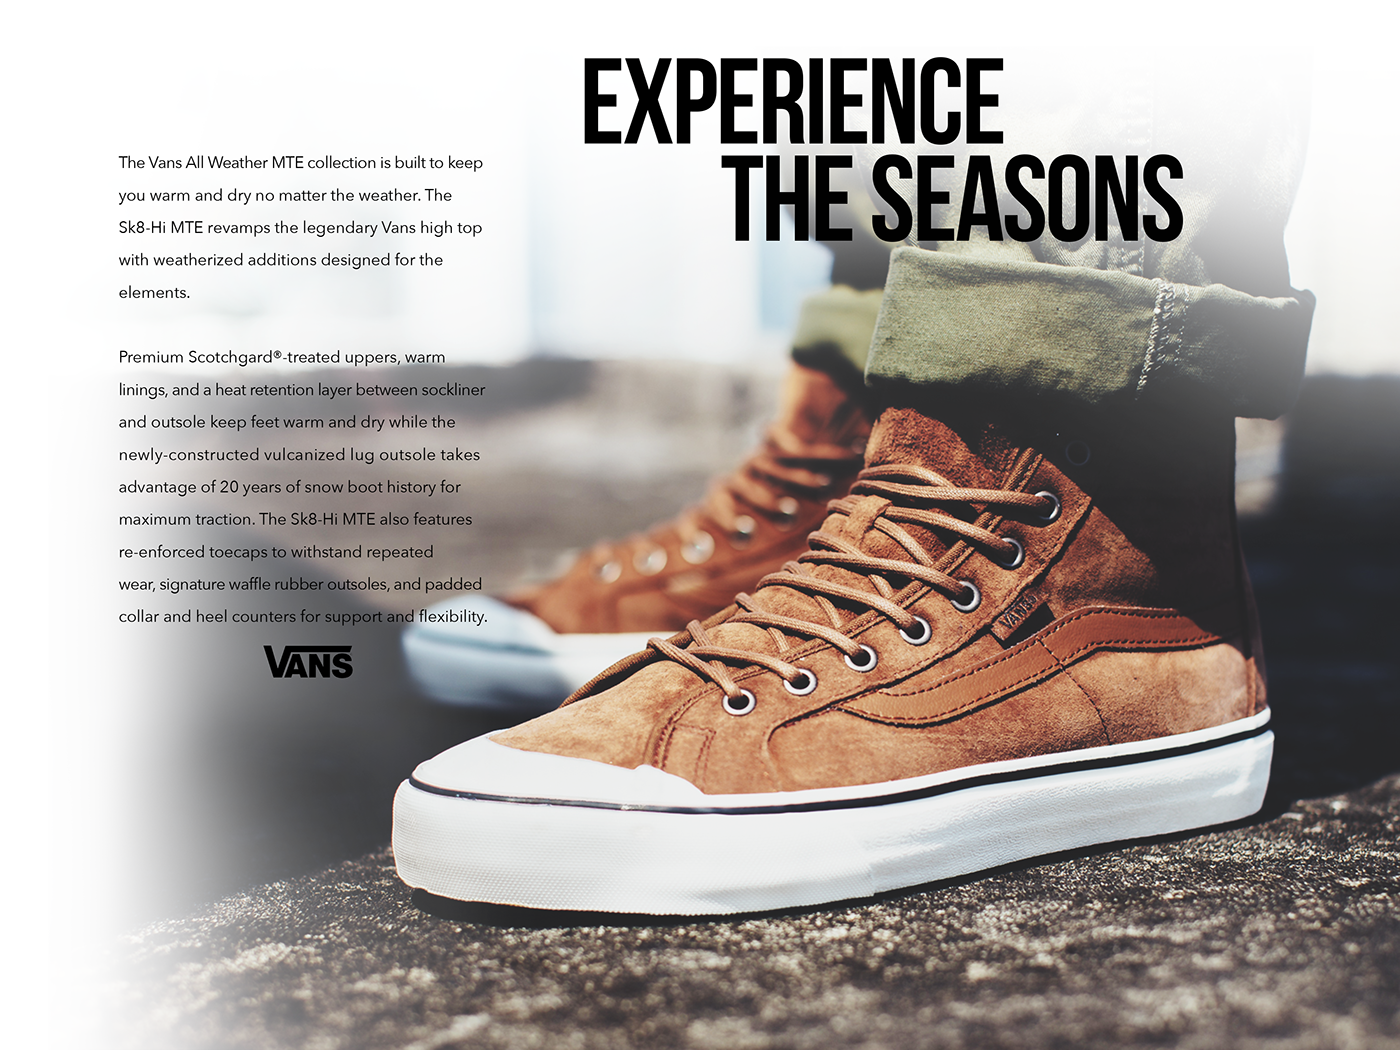 Vans shoes Vans off the wall ads advertisements shoes ad design